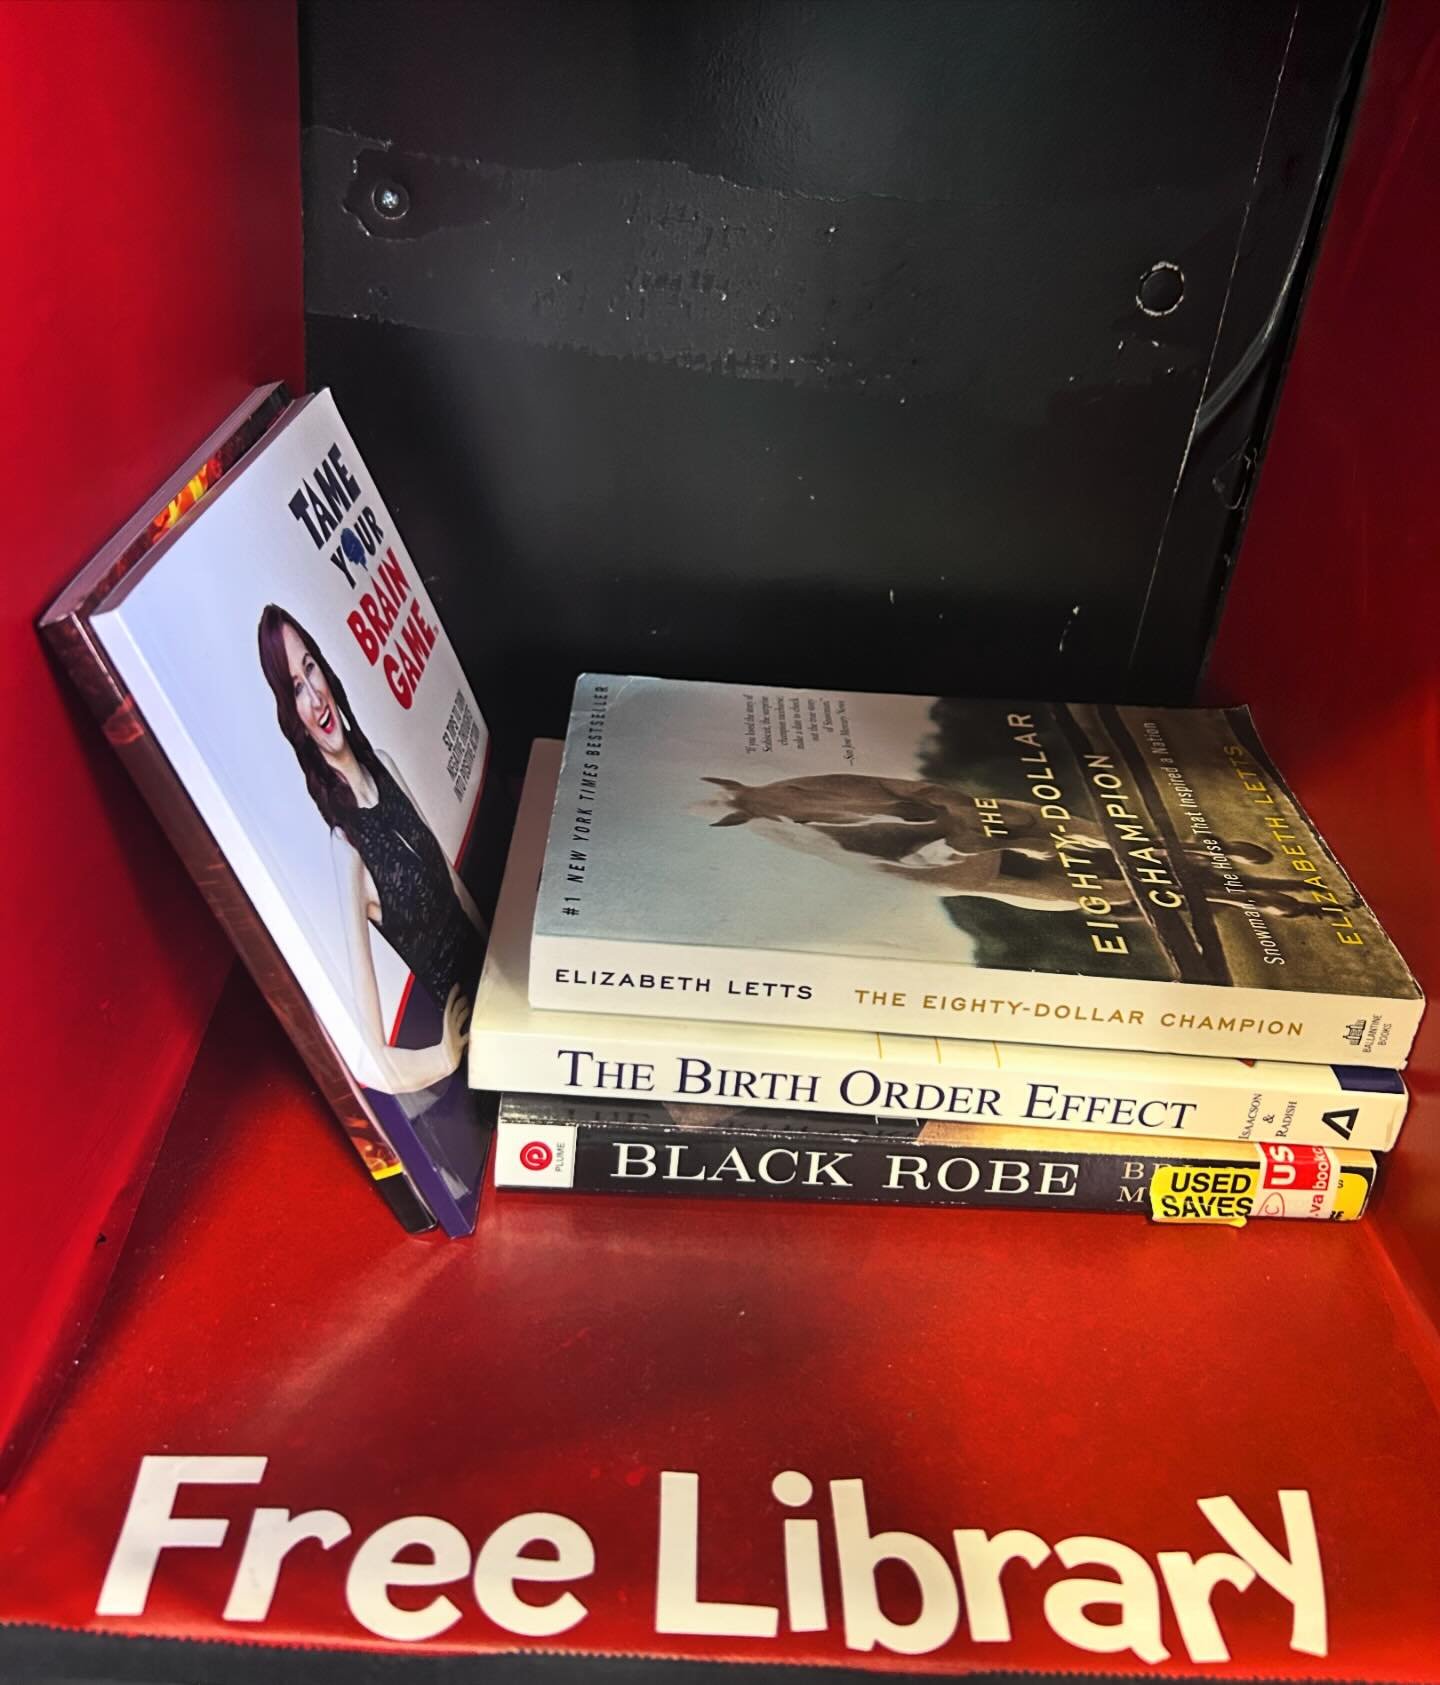 New at T&amp;D! 📚 We have our very own Little Free Library in the cubby area! Take a book, leave a book at your next workout. 😊

Drop the best thing you&rsquo;ve read lately in the comments 👇

&mdash;&mdash;&mdash;&mdash;&mdash;&mdash;&mdash;&mdas